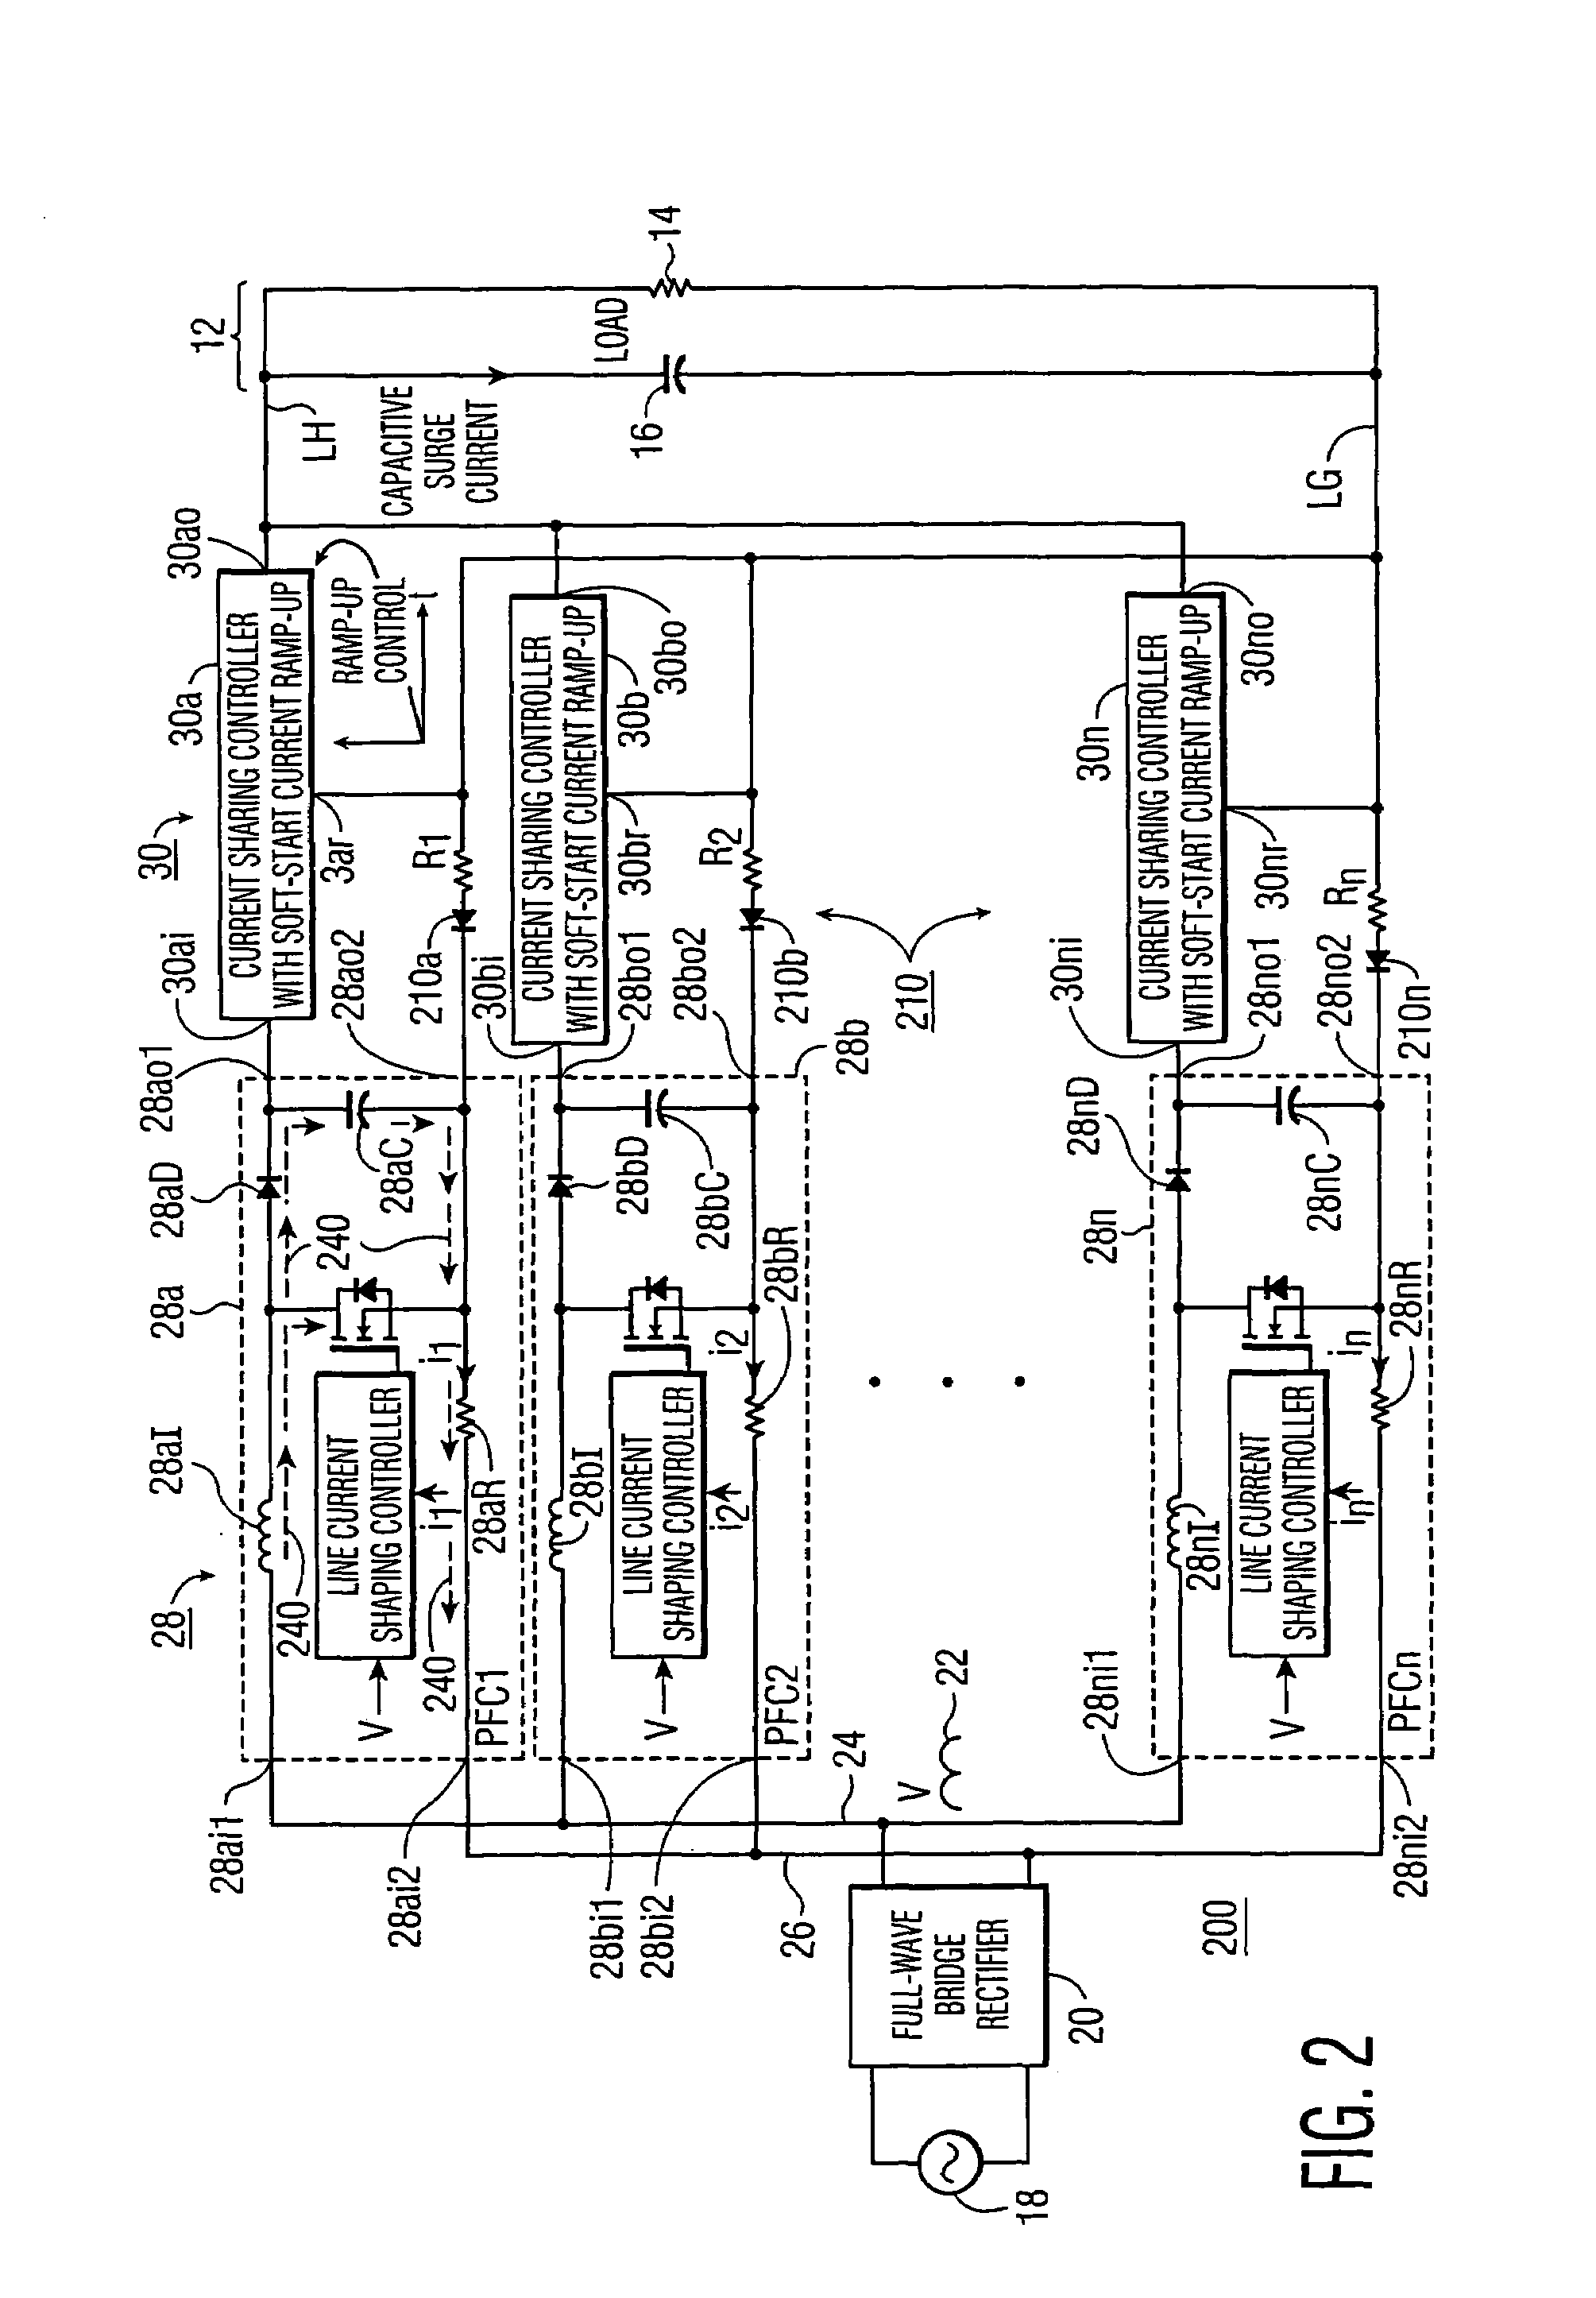 Precharging load capacitor for power-factor-corrected AC-to-DC power supply